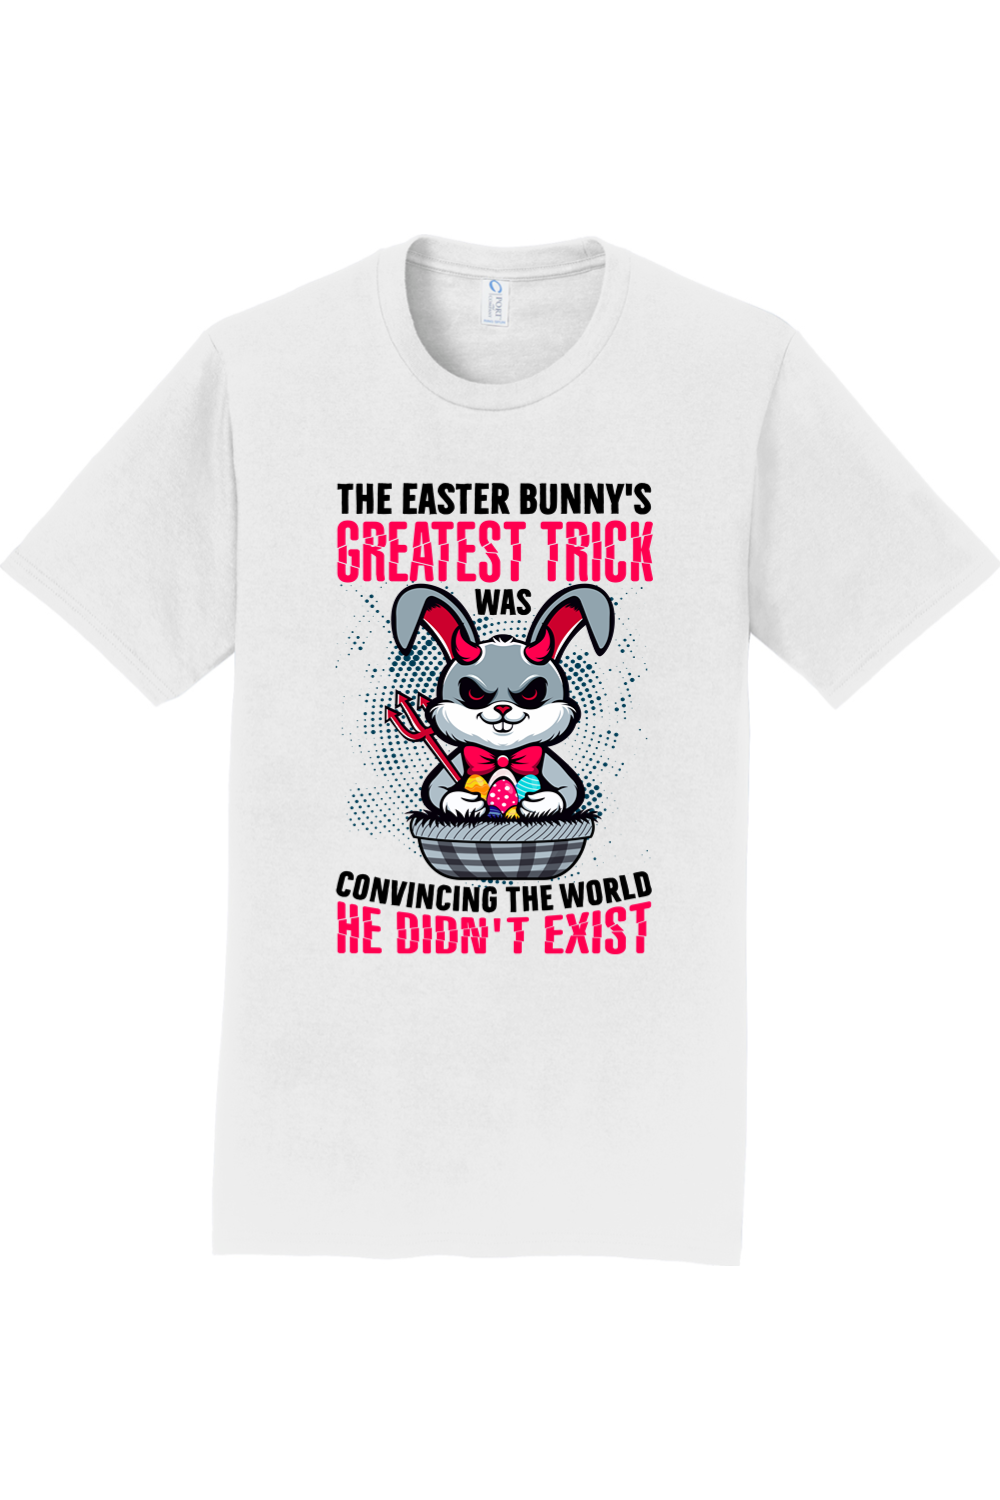 The Easter Bunny's Greatest Trick Basket Tee